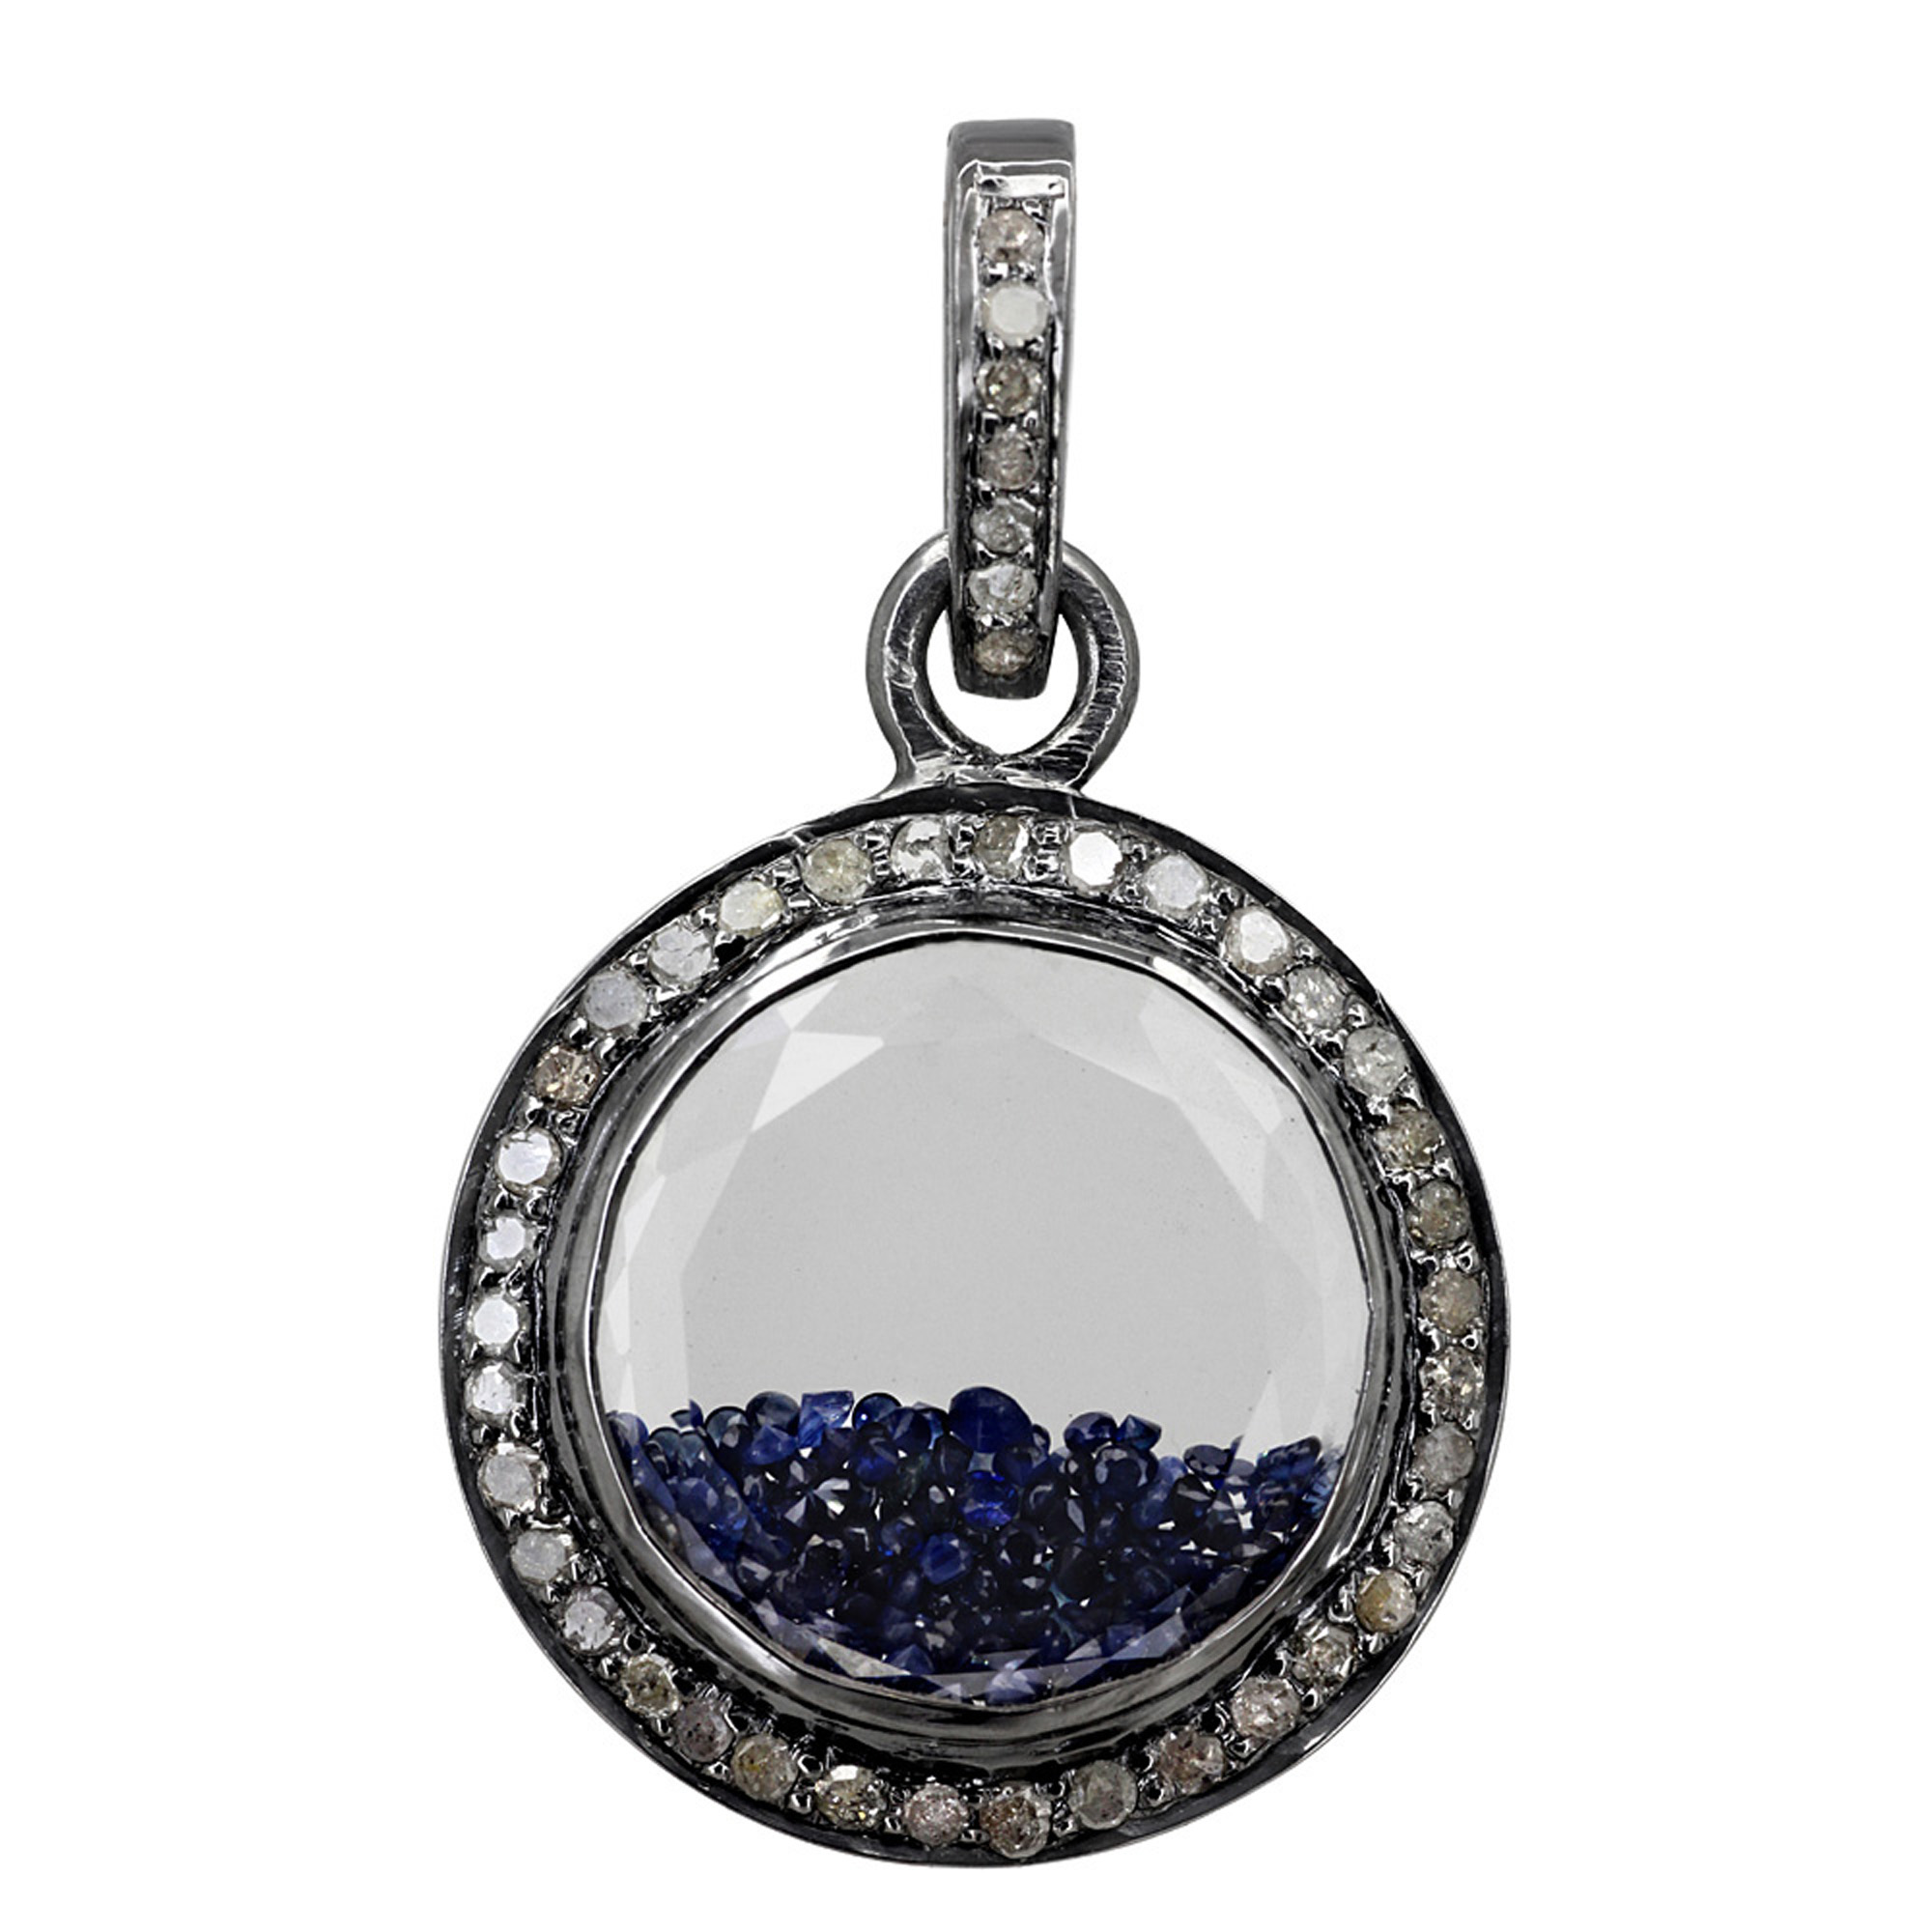 Real diamond 925 sterling silver crystal shaker pendant with blue sapphire